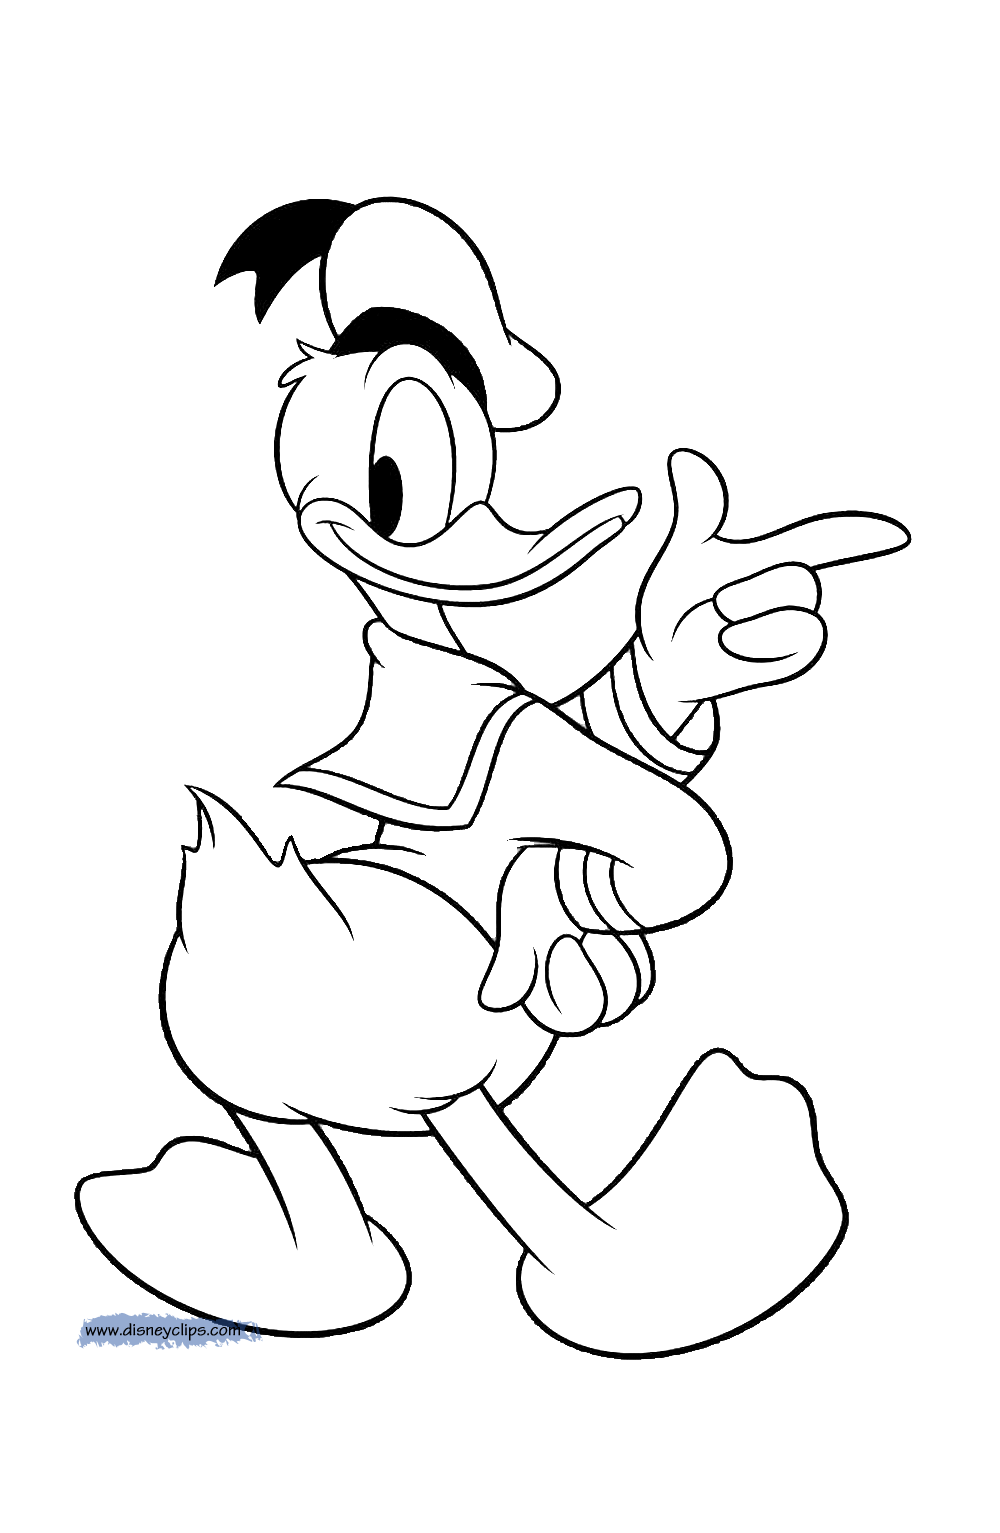 Download Donald and Daisy Duck Coloring Pages 3 | Disney Coloring Book